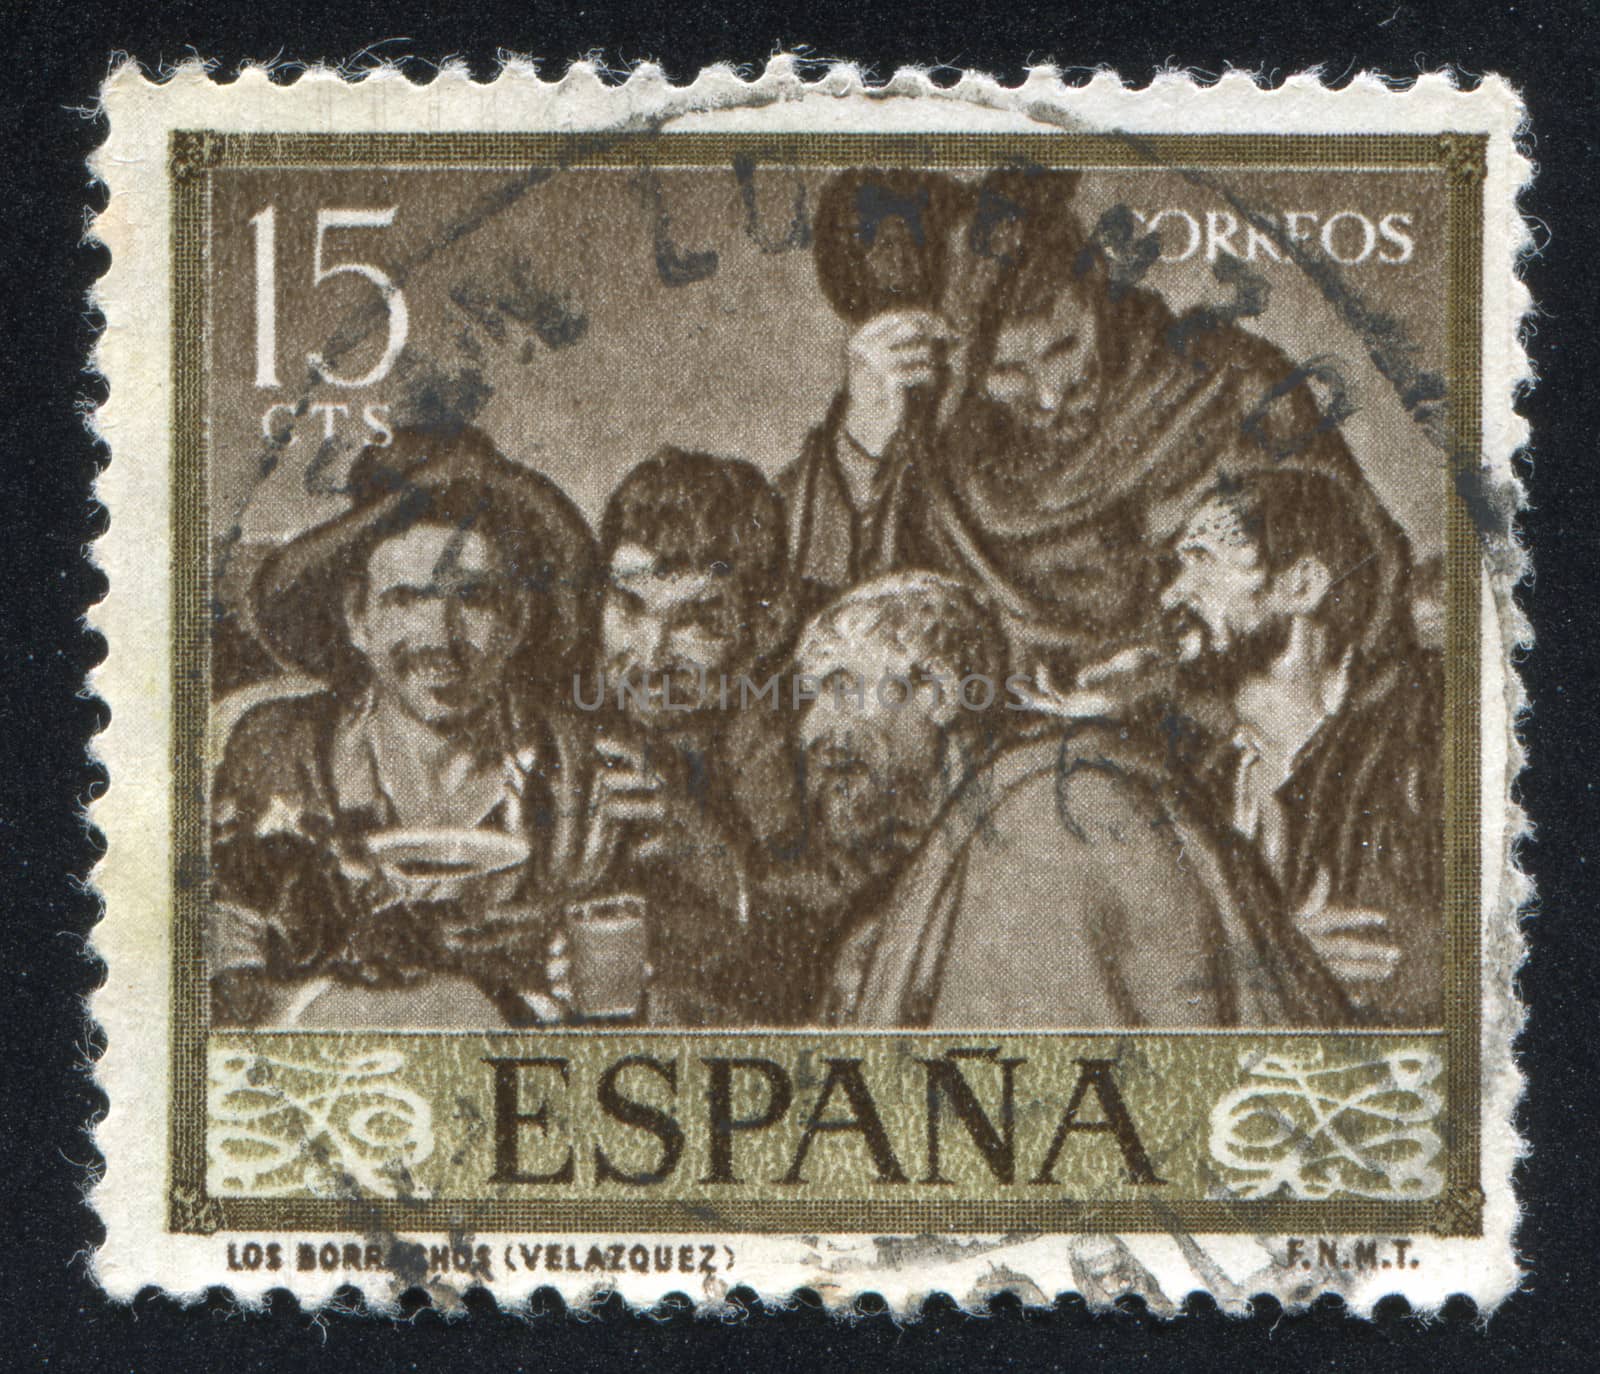 SPAIN - CIRCA 1959: stamp printed by Spain, shows The drunkers by Velazquez, circa 1959